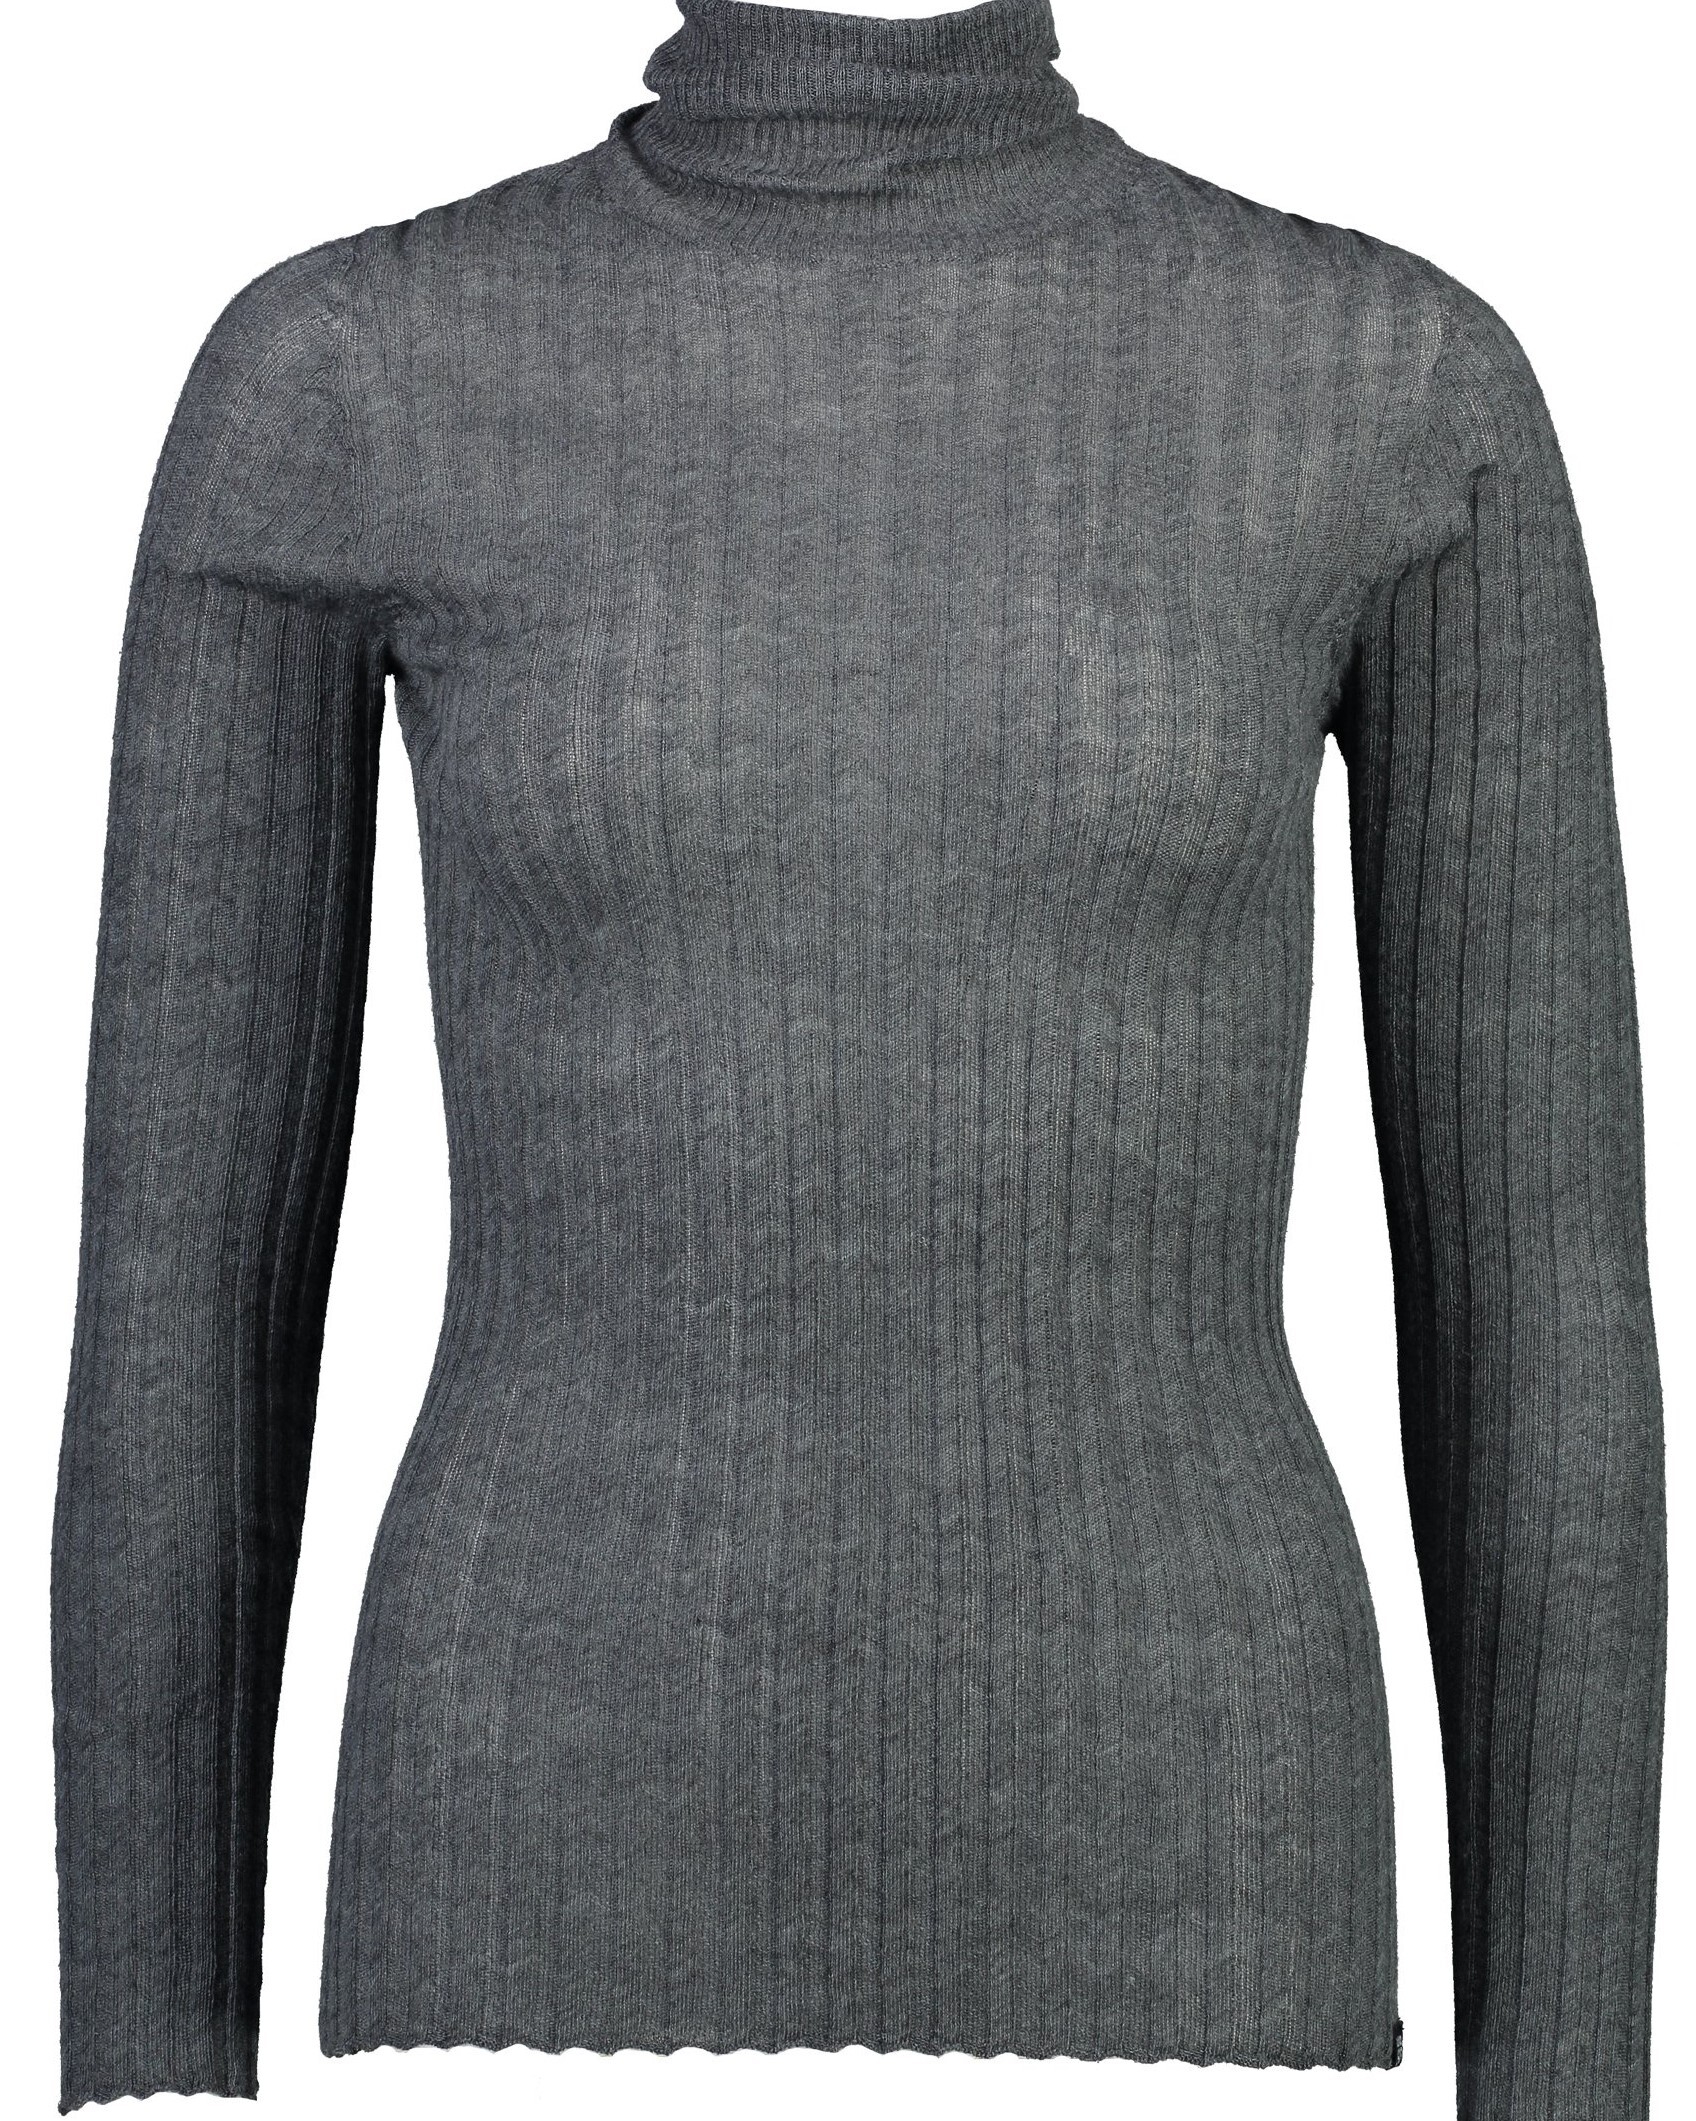 MERINO TULLE SKIVVY (GREY)- STANDARD ISSUE AW20 Boxing Day Sale